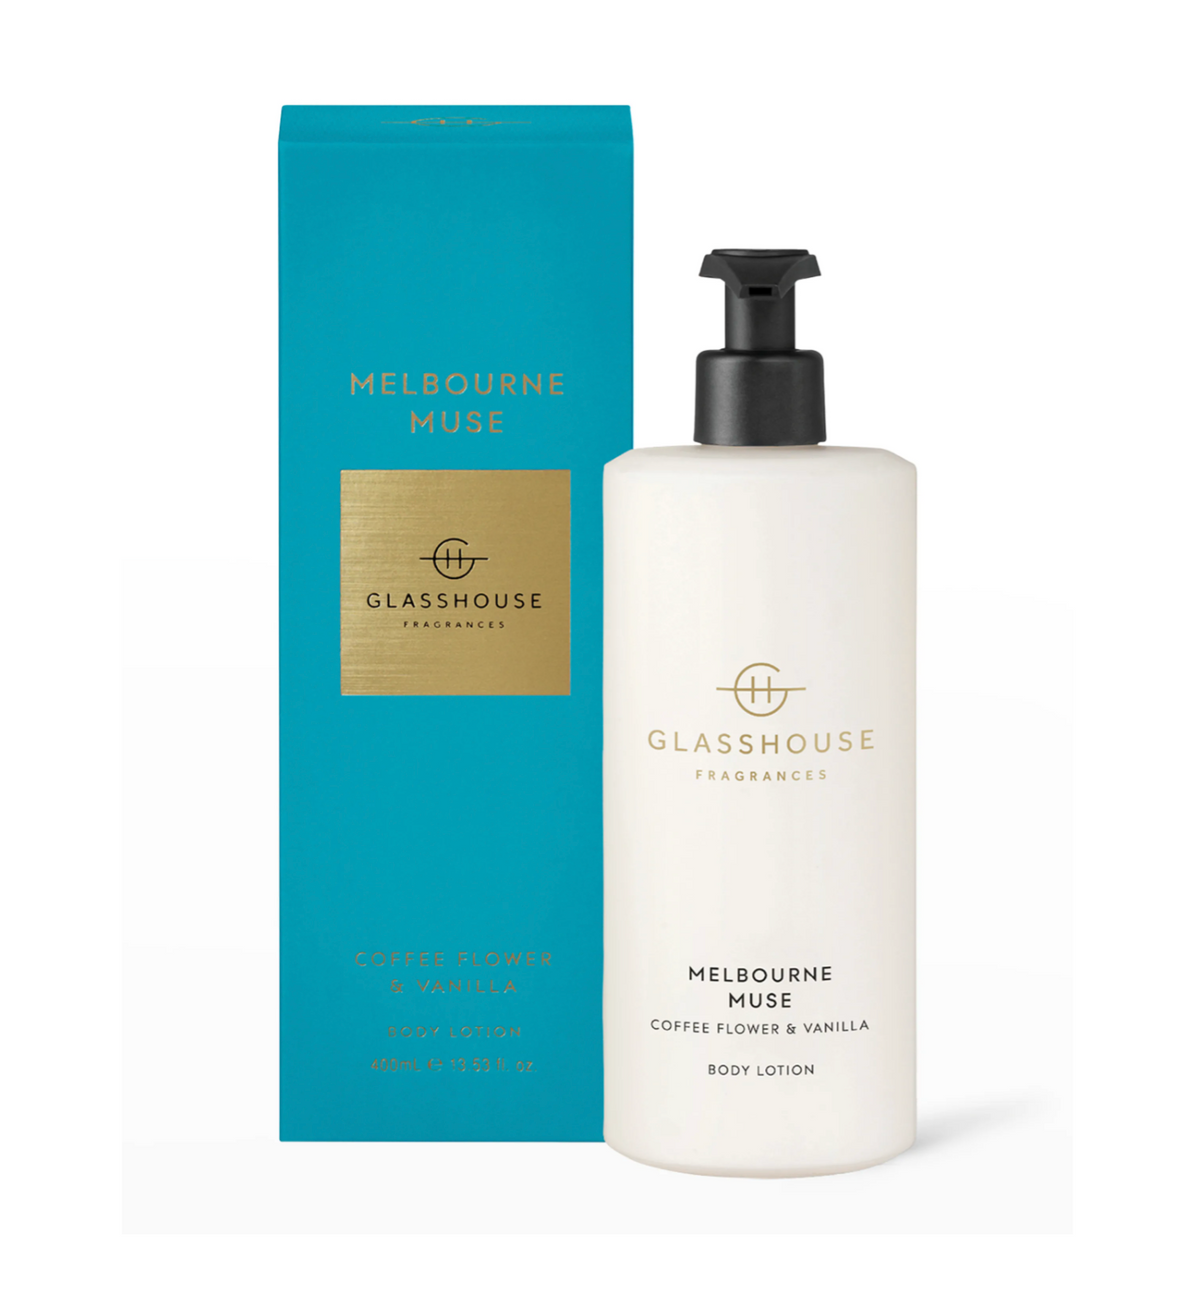 Melbourne Muse Body Lotion